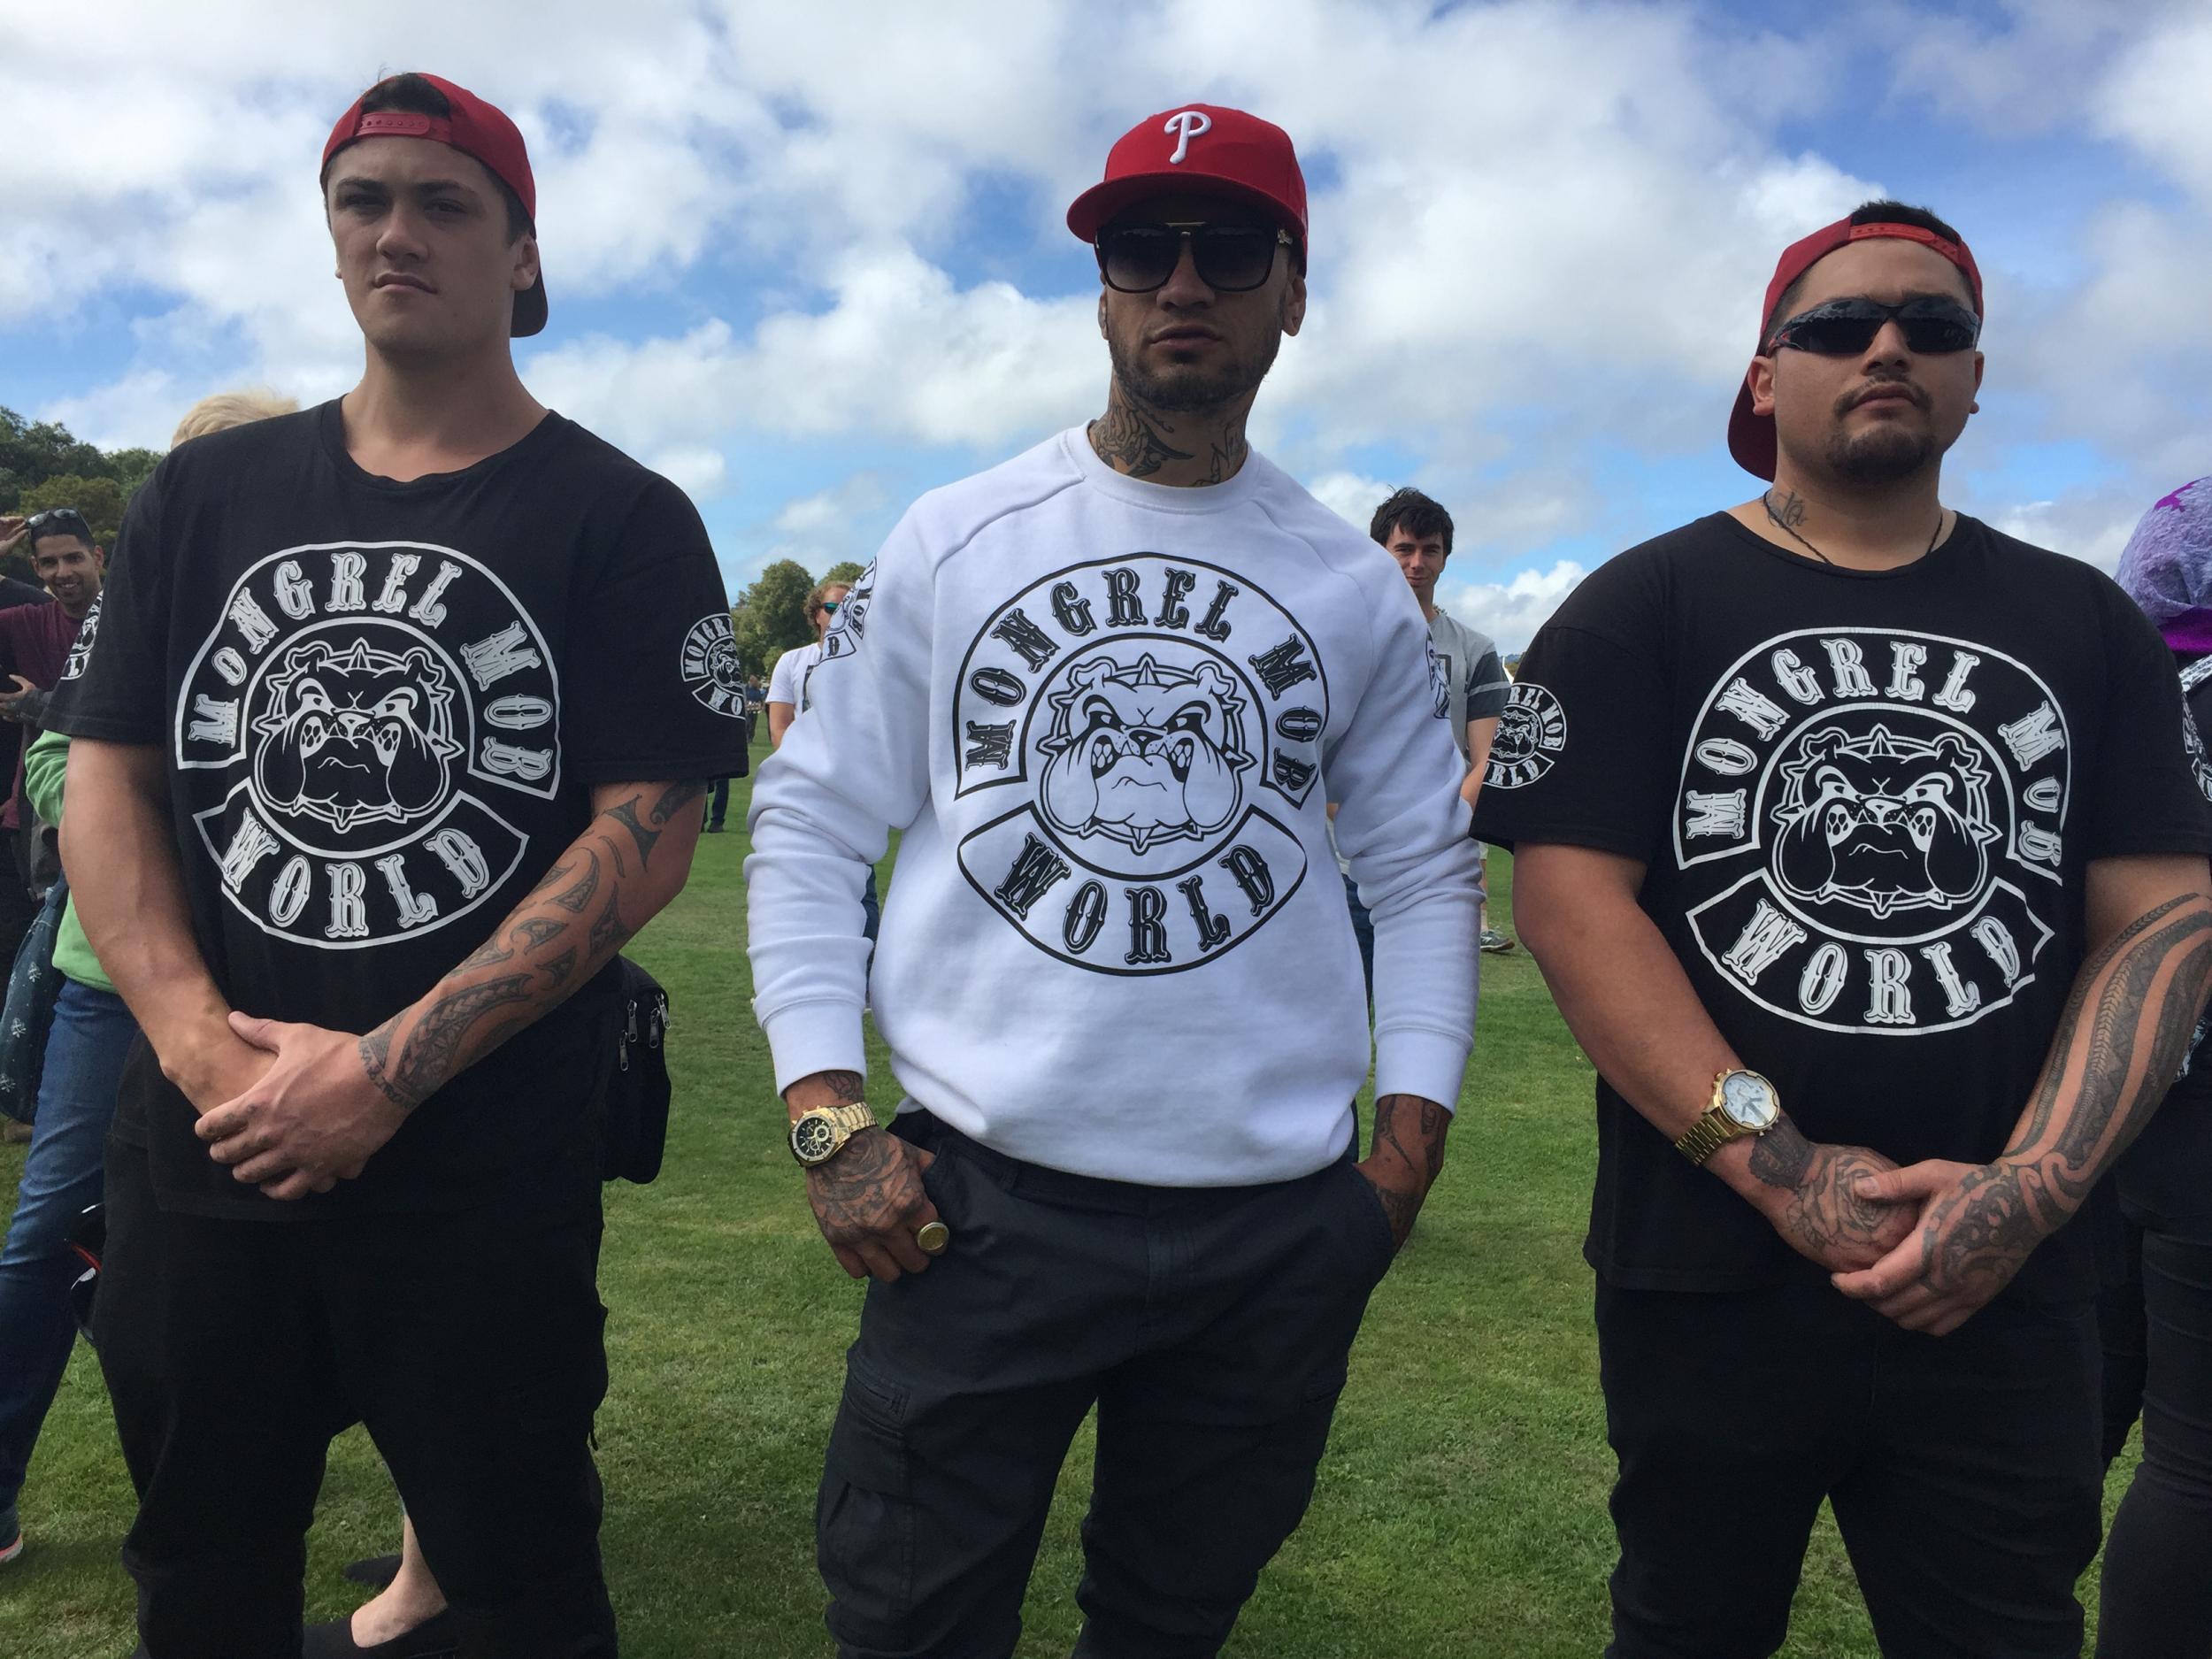 Members of the Mongrel Mob, New Zealand’s best-known gang, have vowed to provide security outside mosques